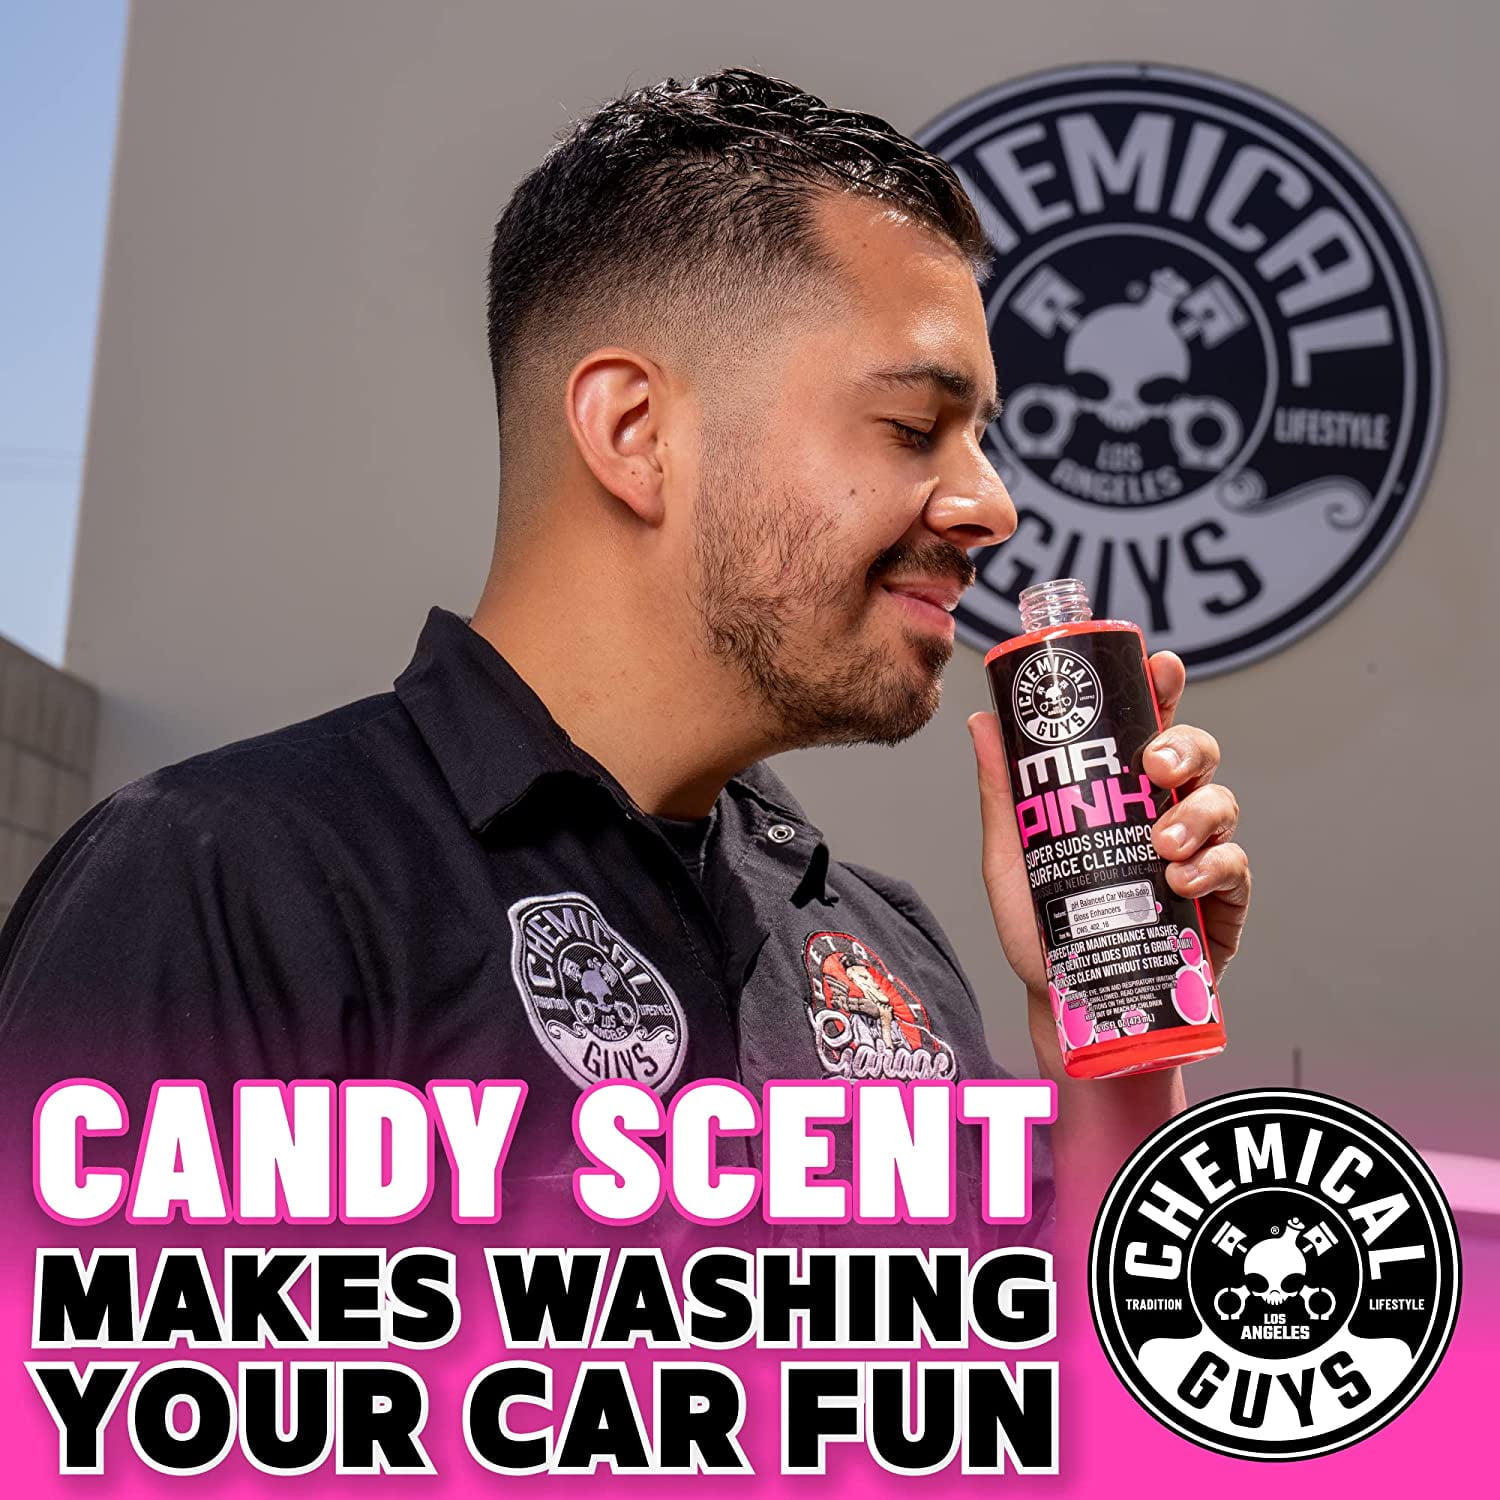 Have you tried Mr. Pink Car Wash Soap? 😃 #carwash #clean #cleantok #a